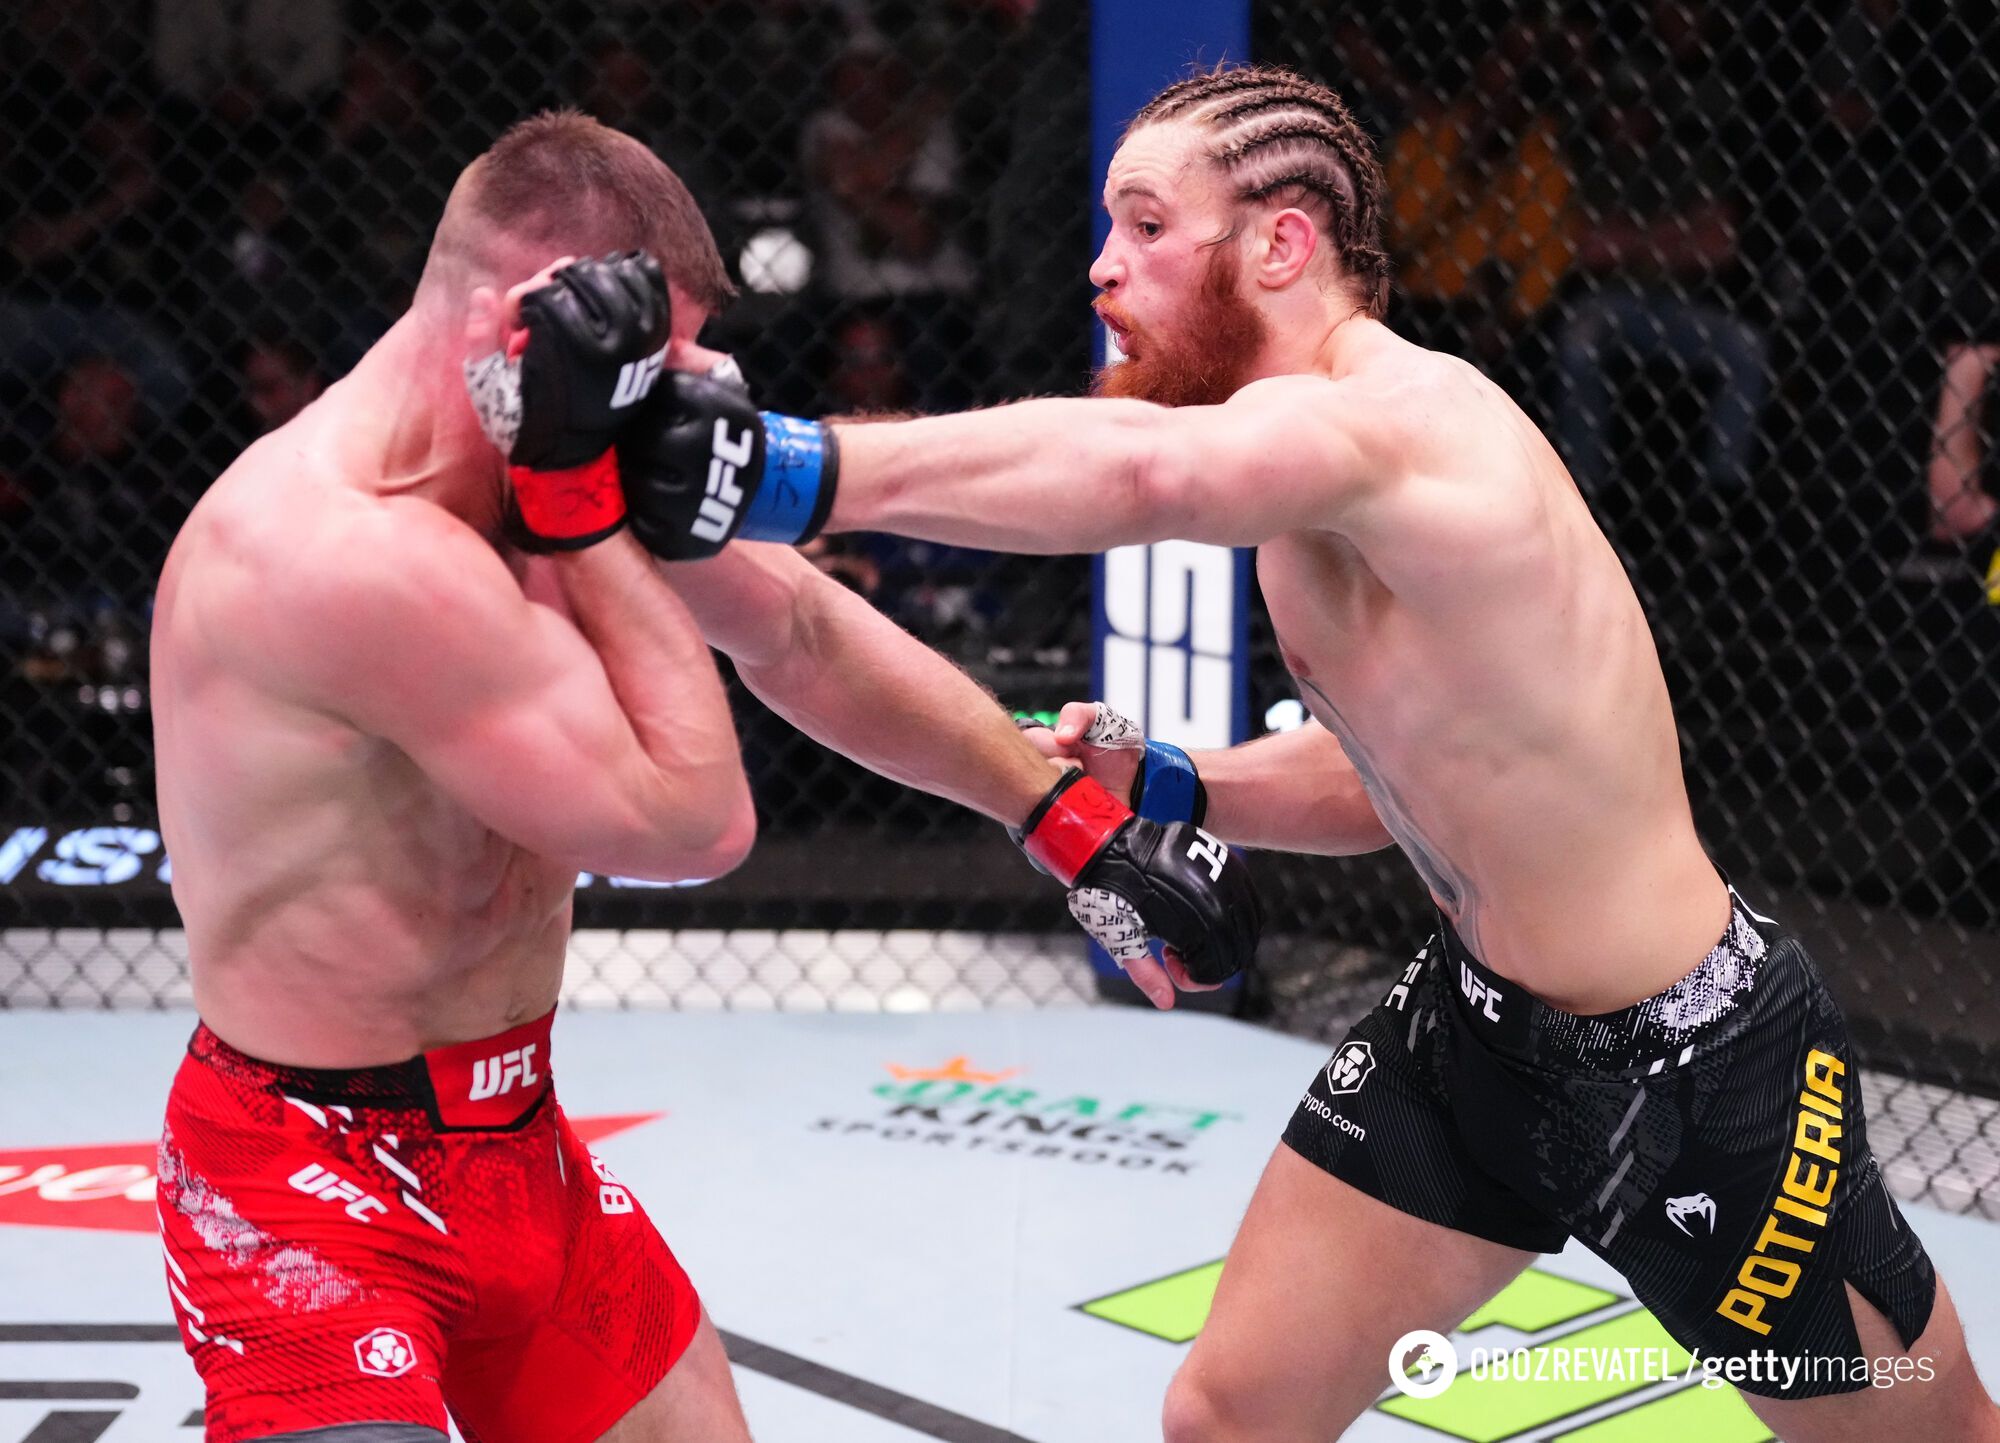 The Ukrainian won a sensational victory in the UFC in a fight with a knockdown. Video.